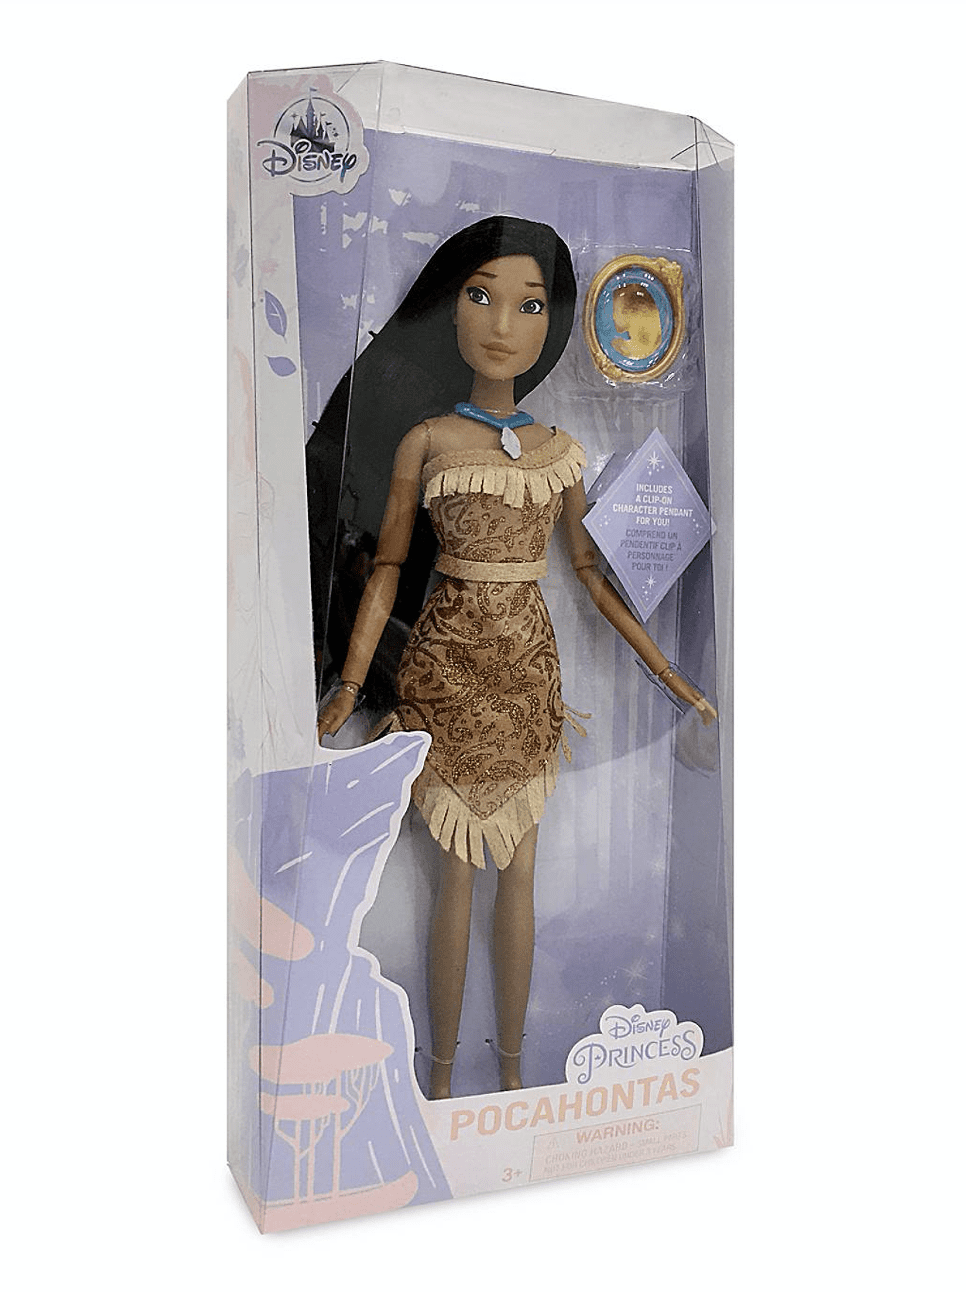 DISNEY STORE PRINCESS POCAHONTAS W/RING 2018 CLASSIC BARBIE DOLL COLLECTION 